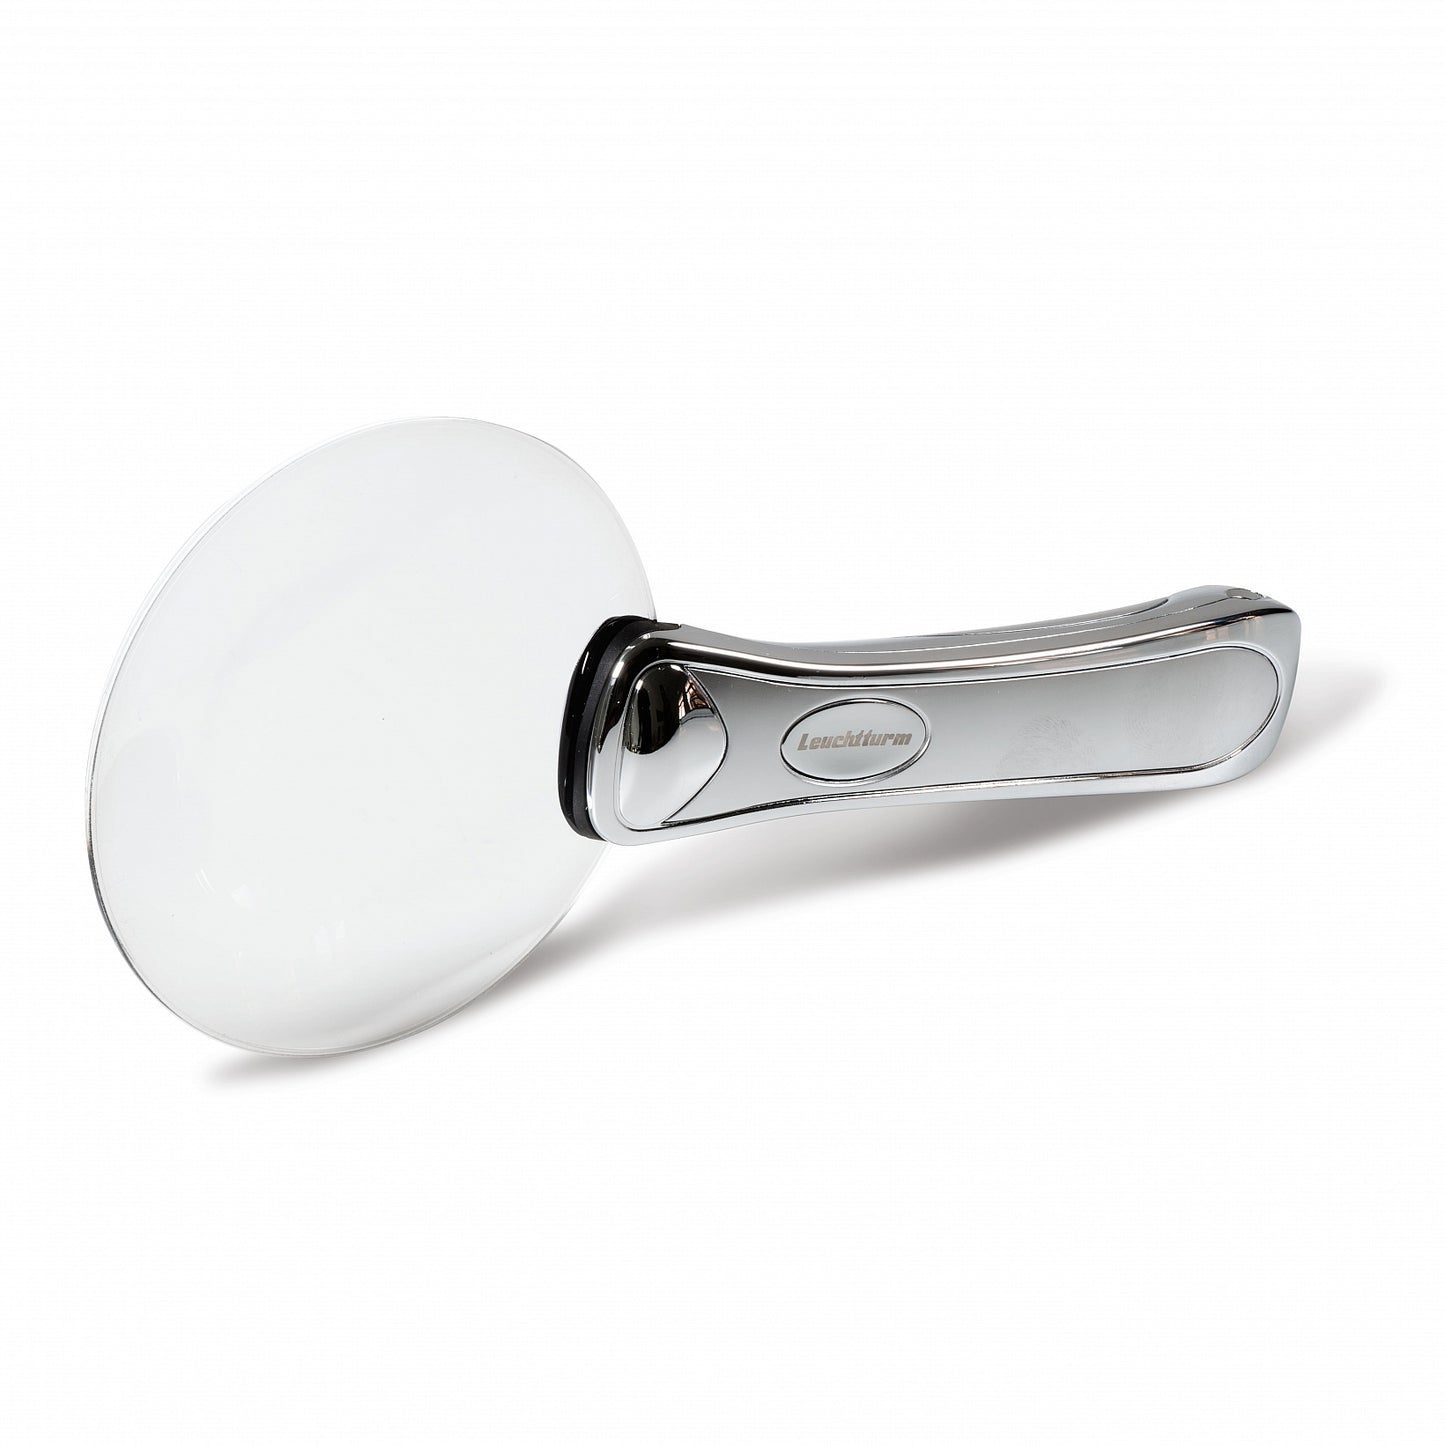 Frameless Magnifier with Chrome Handle